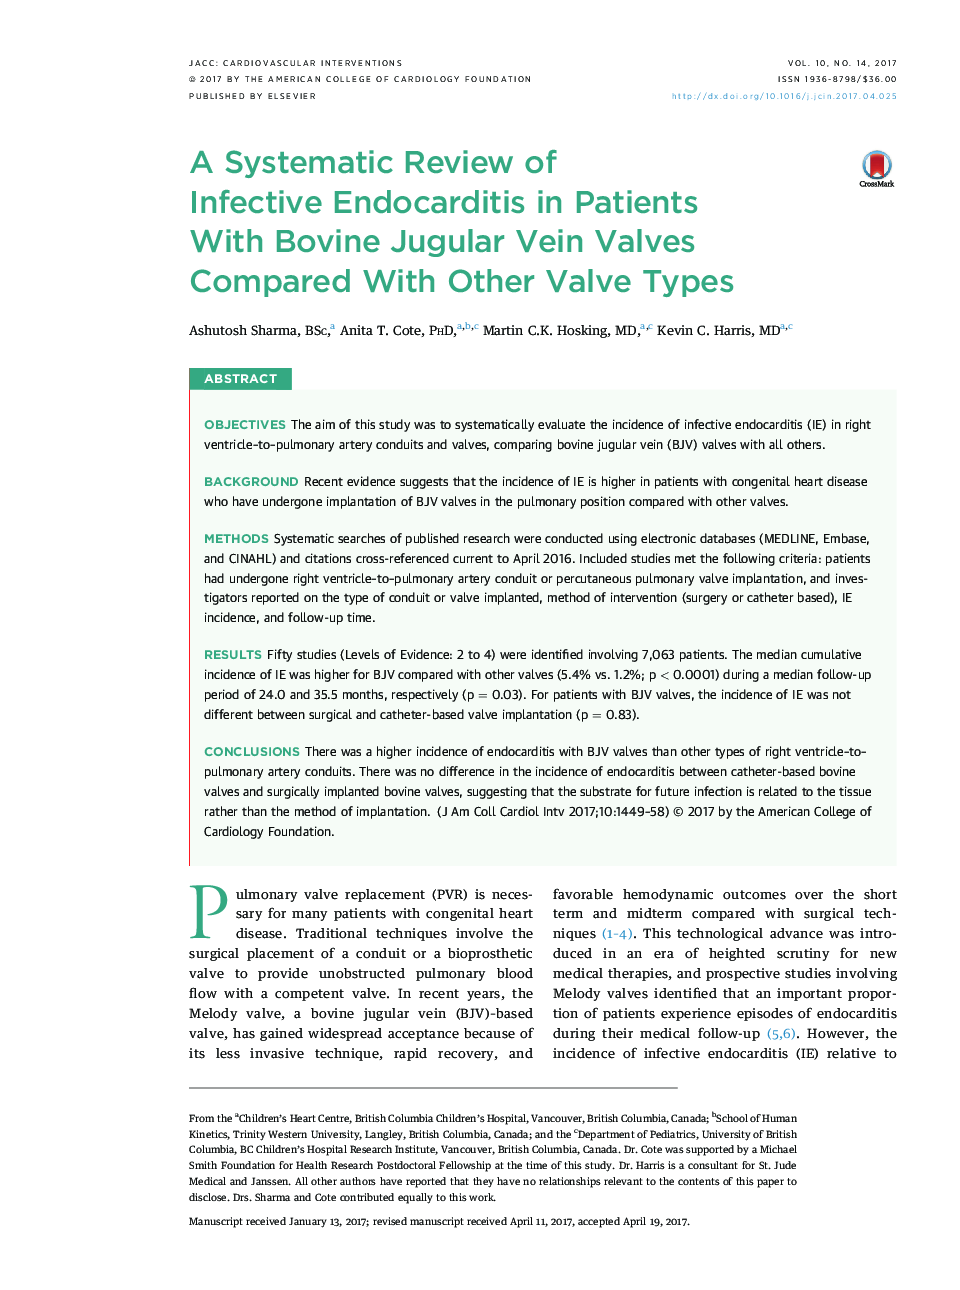 A Systematic Review of InfectiveÂ Endocarditis in Patients With Bovine Jugular Vein Valves Compared With OtherÂ Valve Types